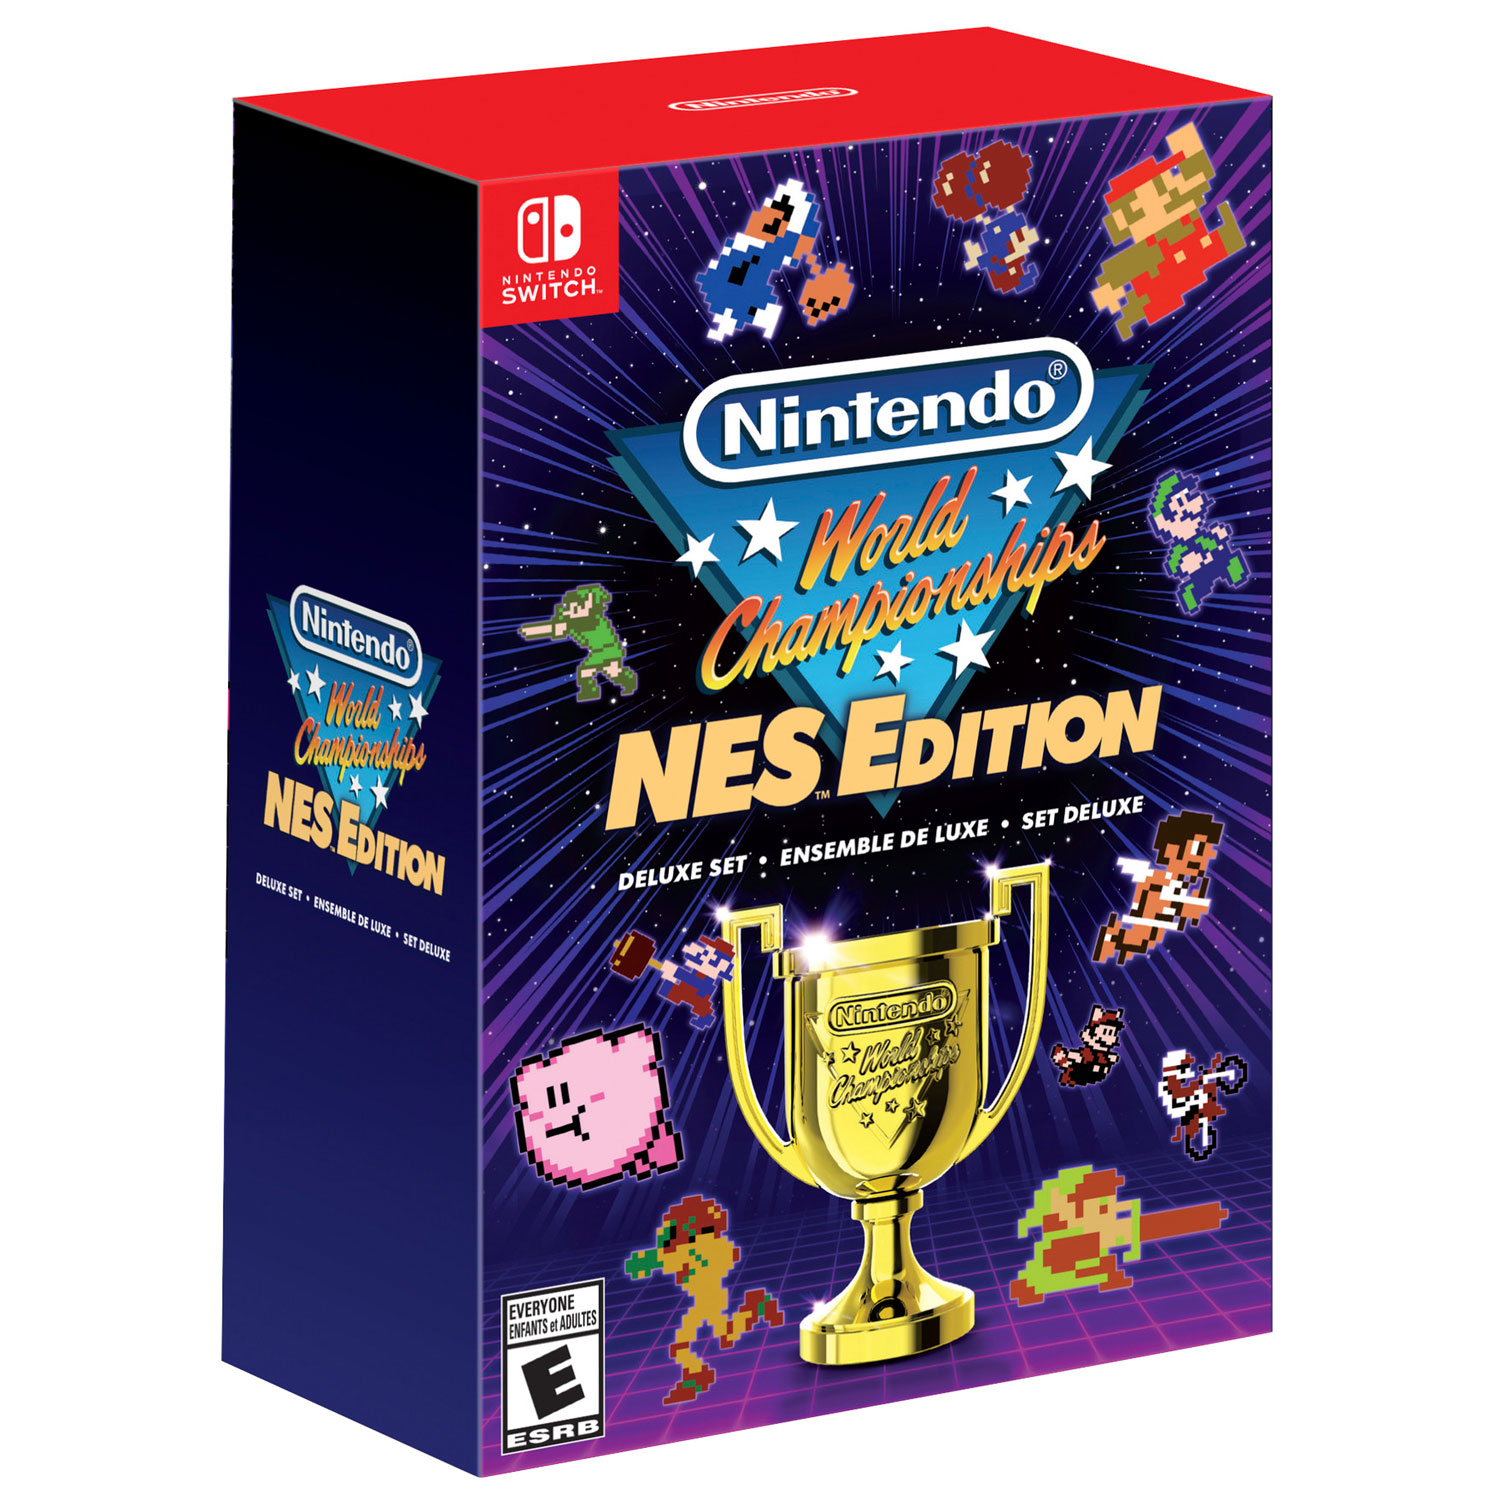 Nintendo World Championships NES Edition Deluxe Set (Switch)